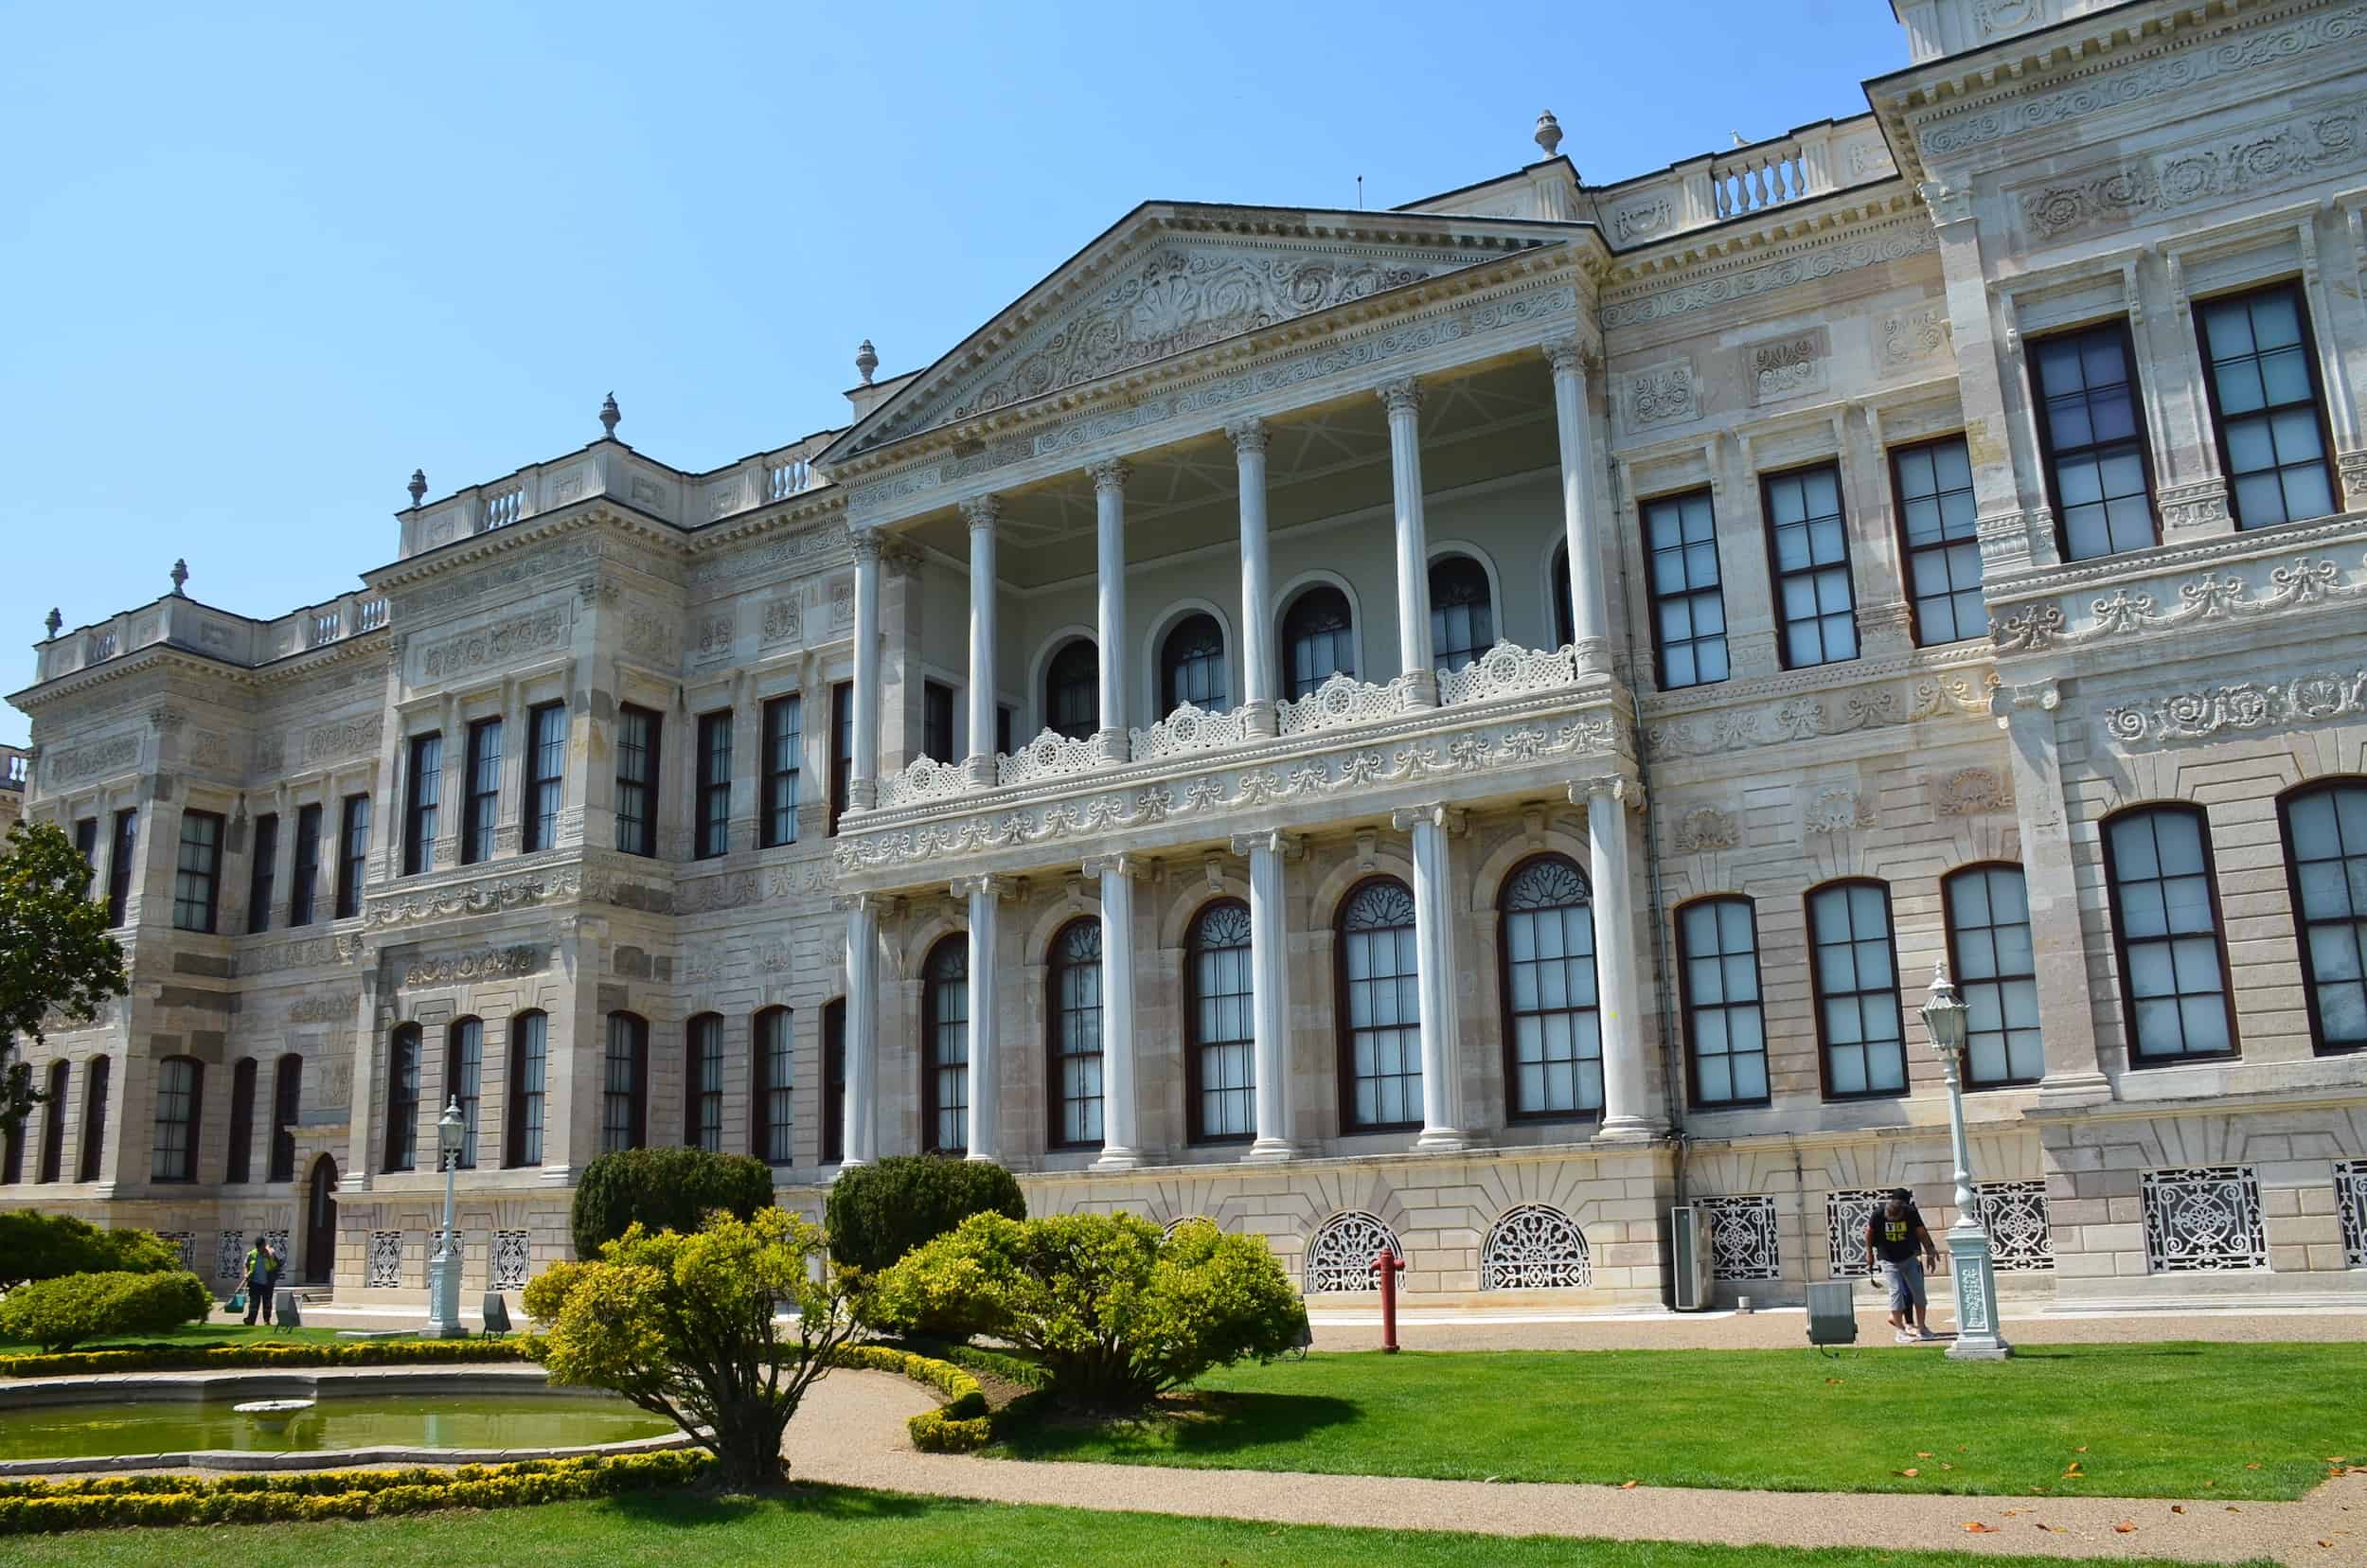 Southern façade of the Apartment of the Crown Prince at Dolmabahçe Palace in Istanbul, Turkey